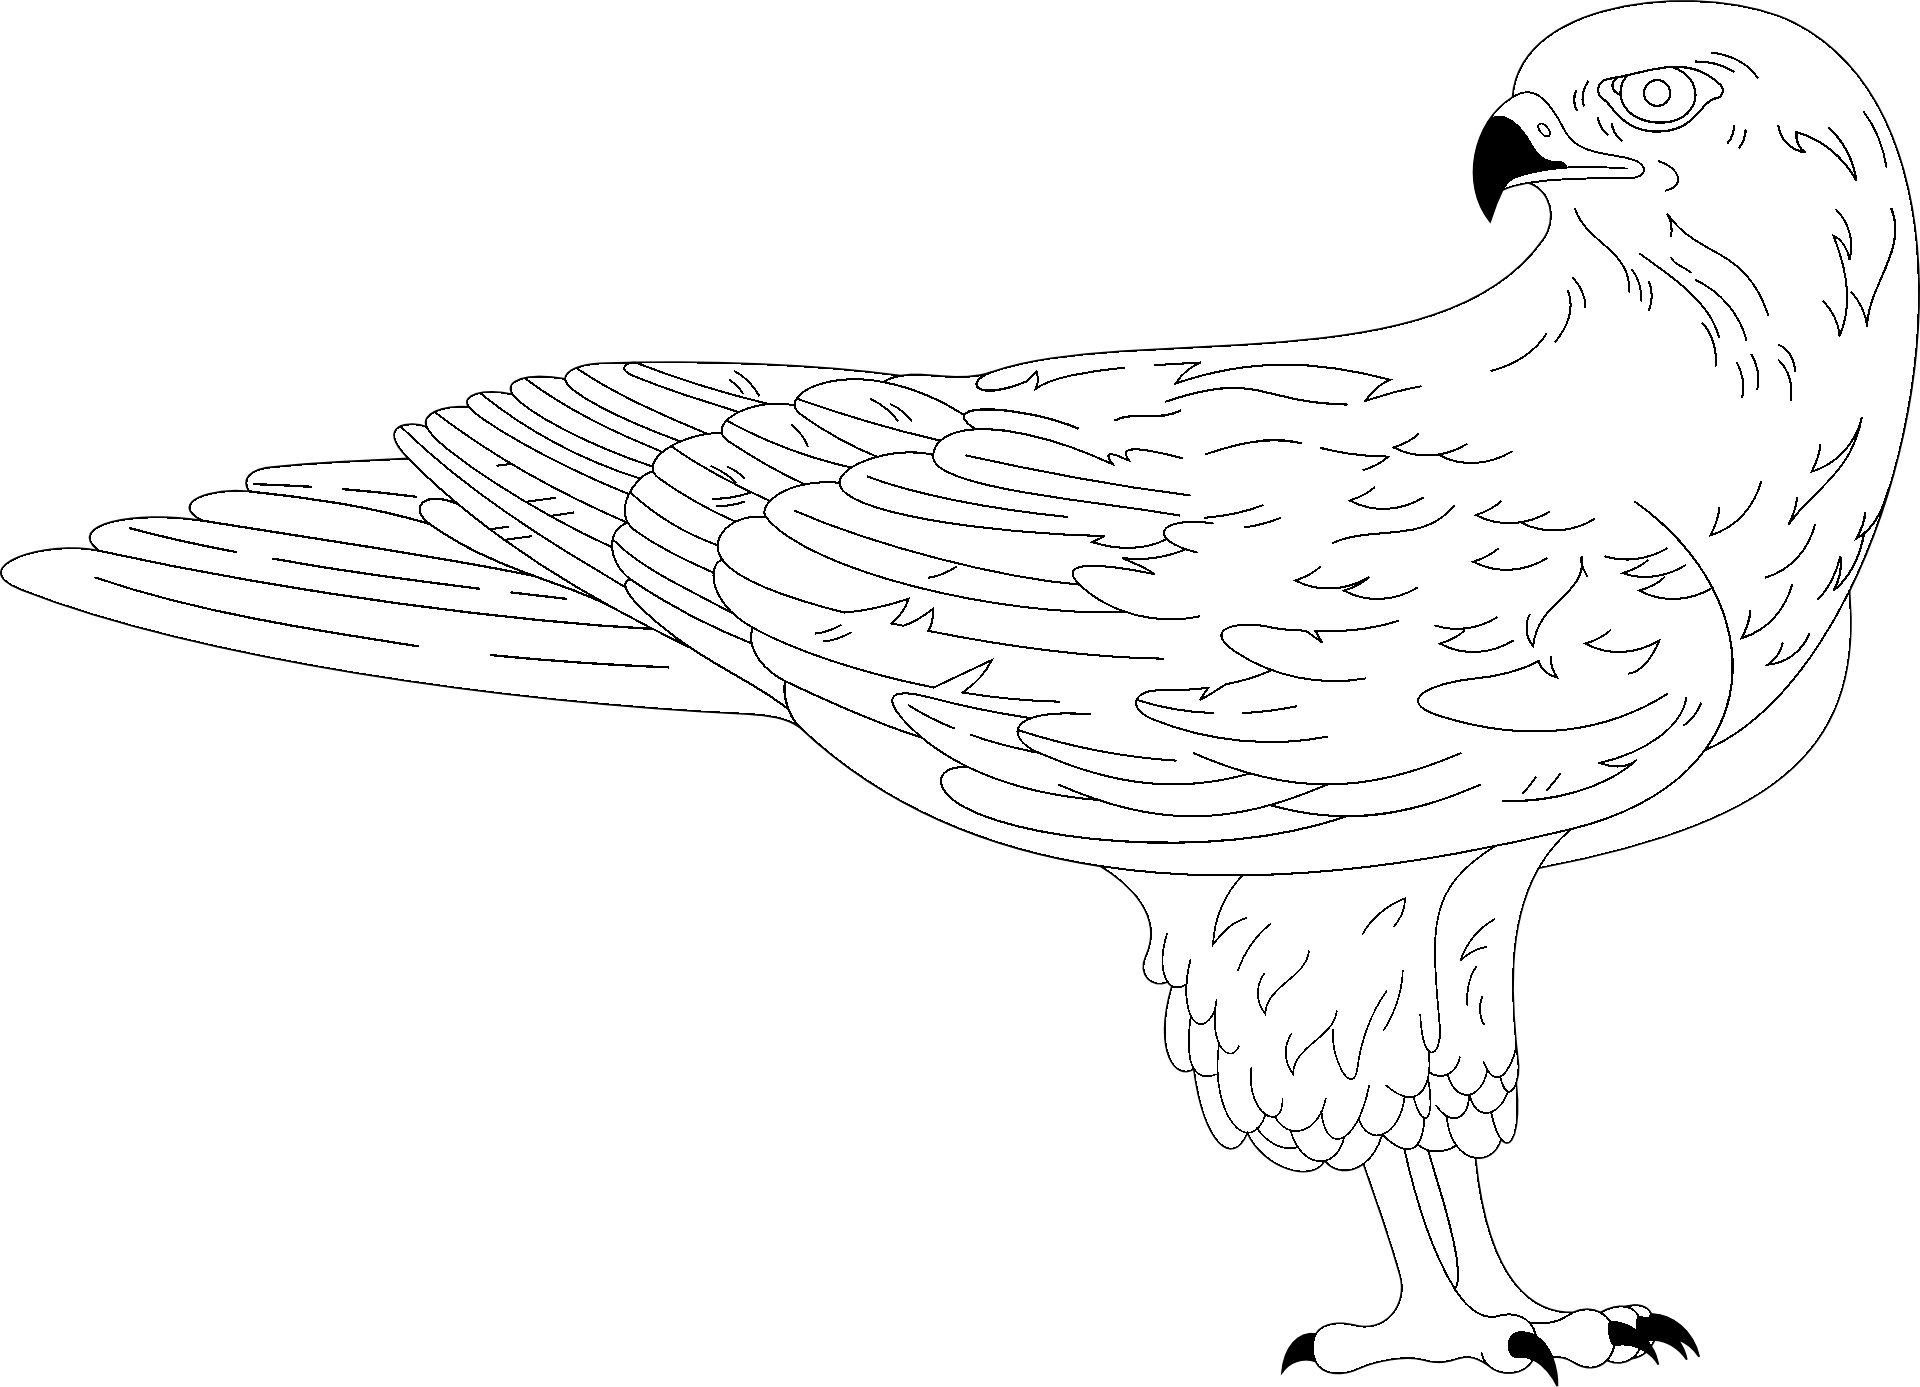 Coloring page of a hawk